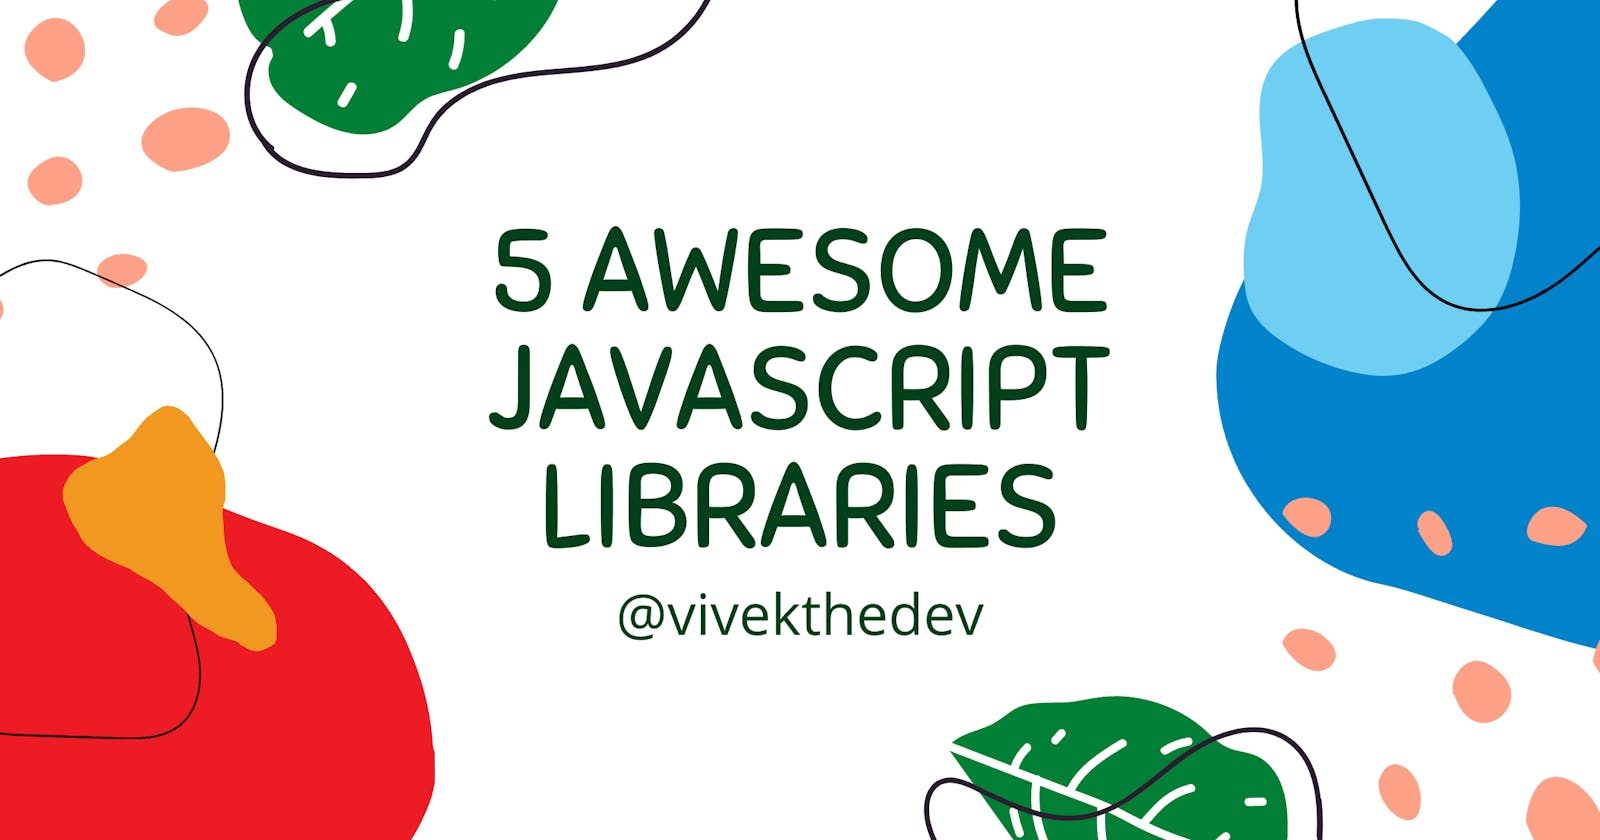 5 JavaScript Libraries that makes working with JS magical